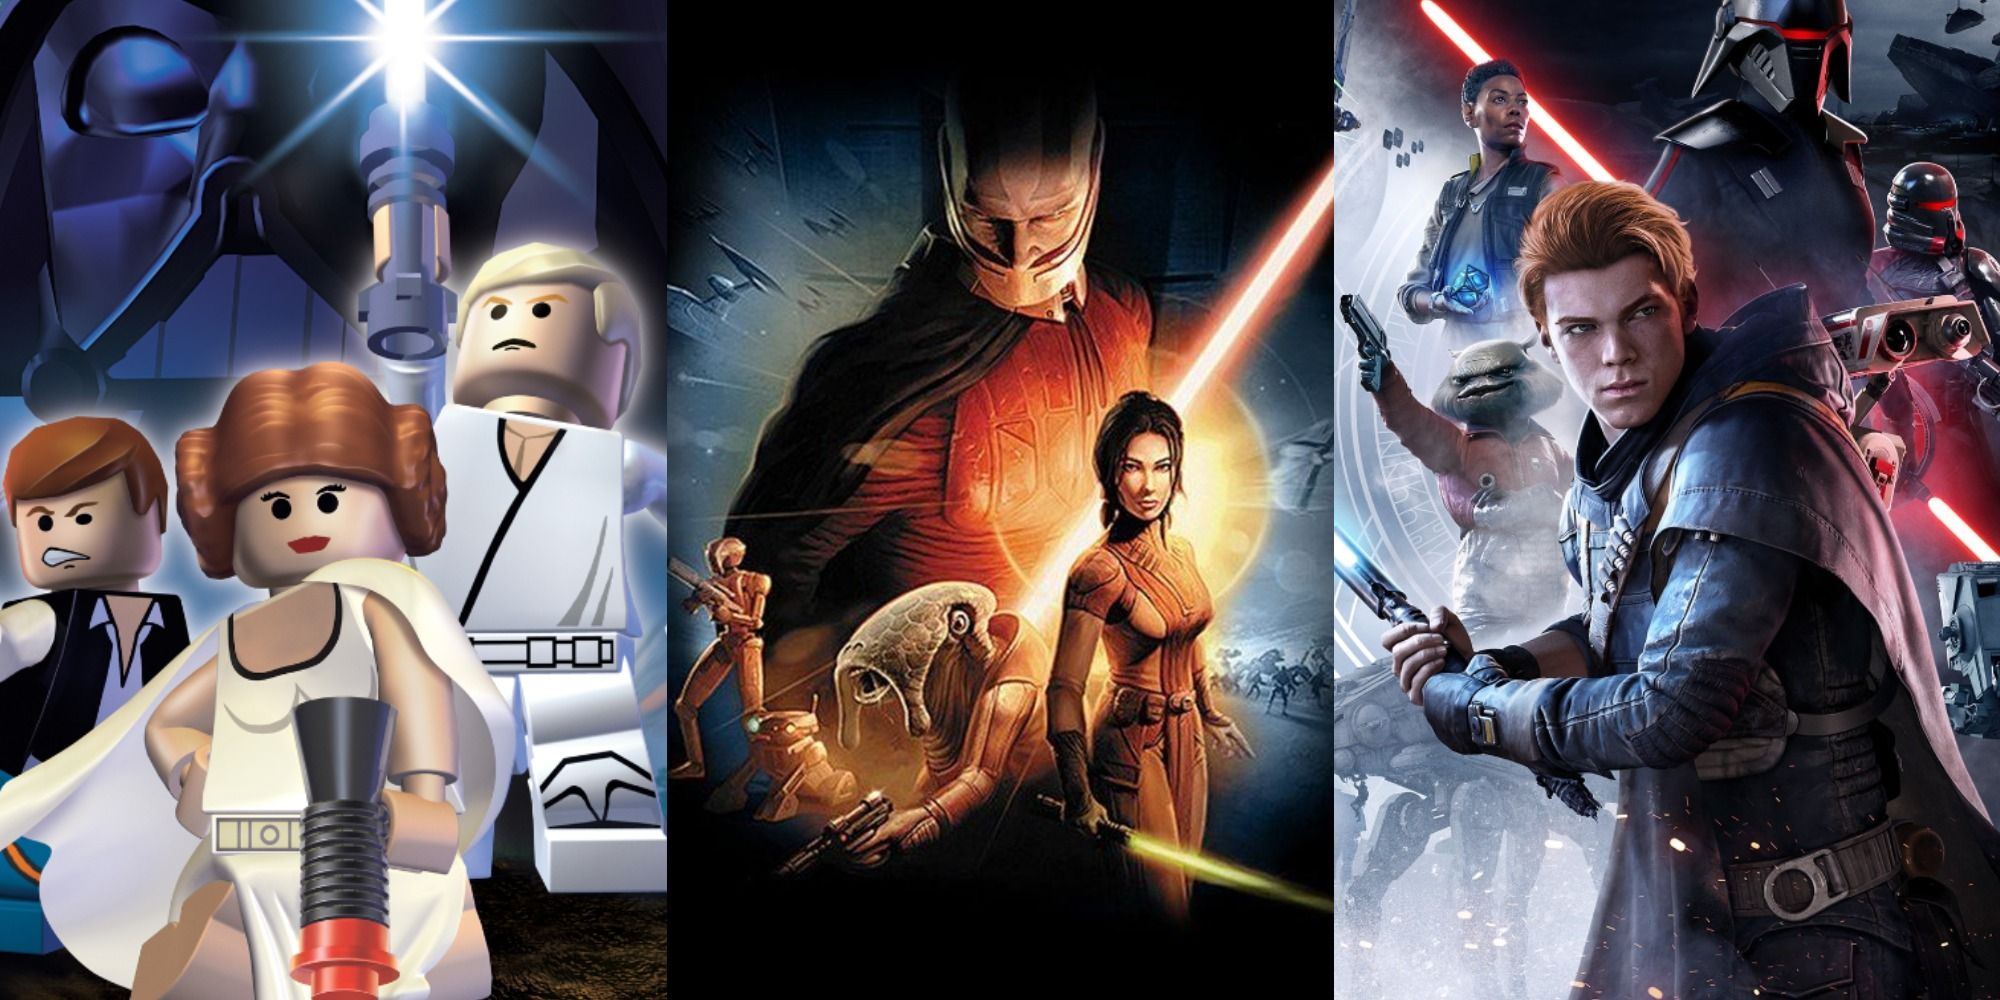 10 Best Star Wars Games of All Time, Ranked – Destructoid